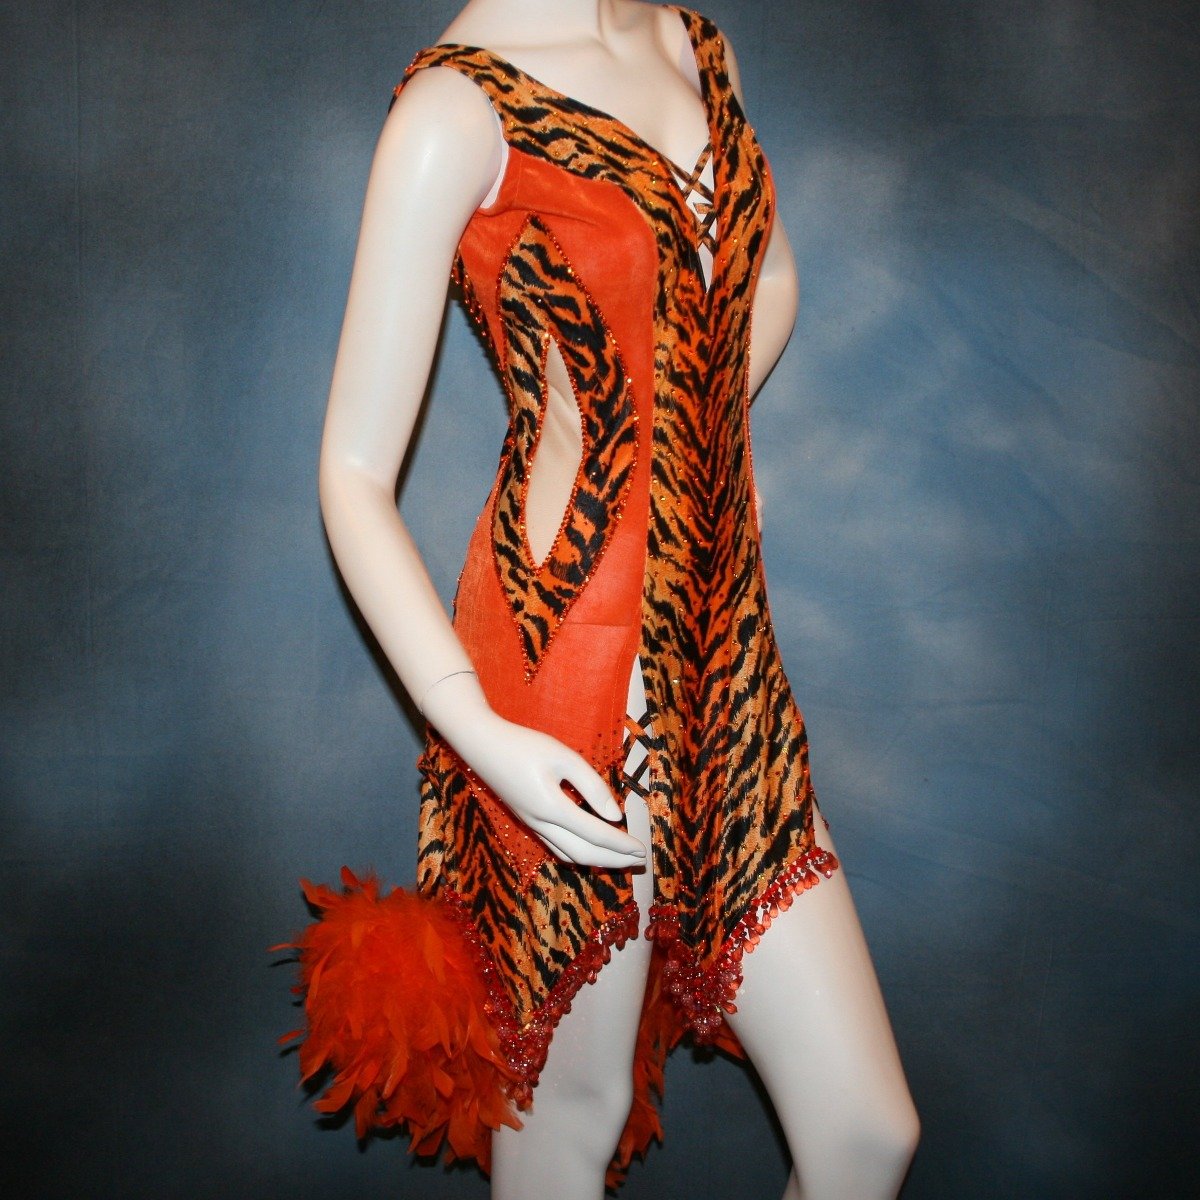 Crystal's Creations close up side view of orange & black tiger print Latin/rhythm dress with chandelle feathers & hand beading